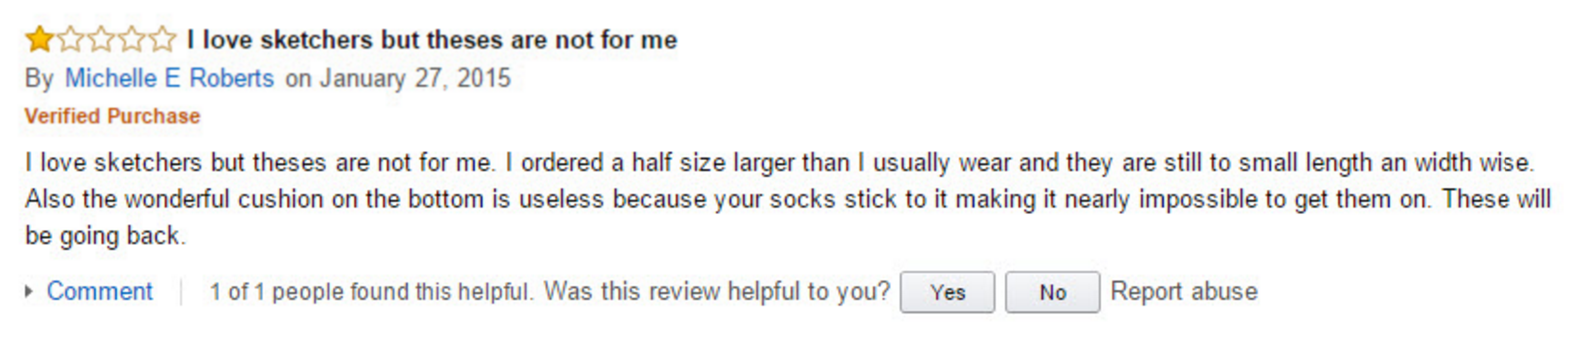 This Amazon customer review of a pair of walking shoes translates to the problem being with the fit of the shoe for a specific person, not necessarily with the product.